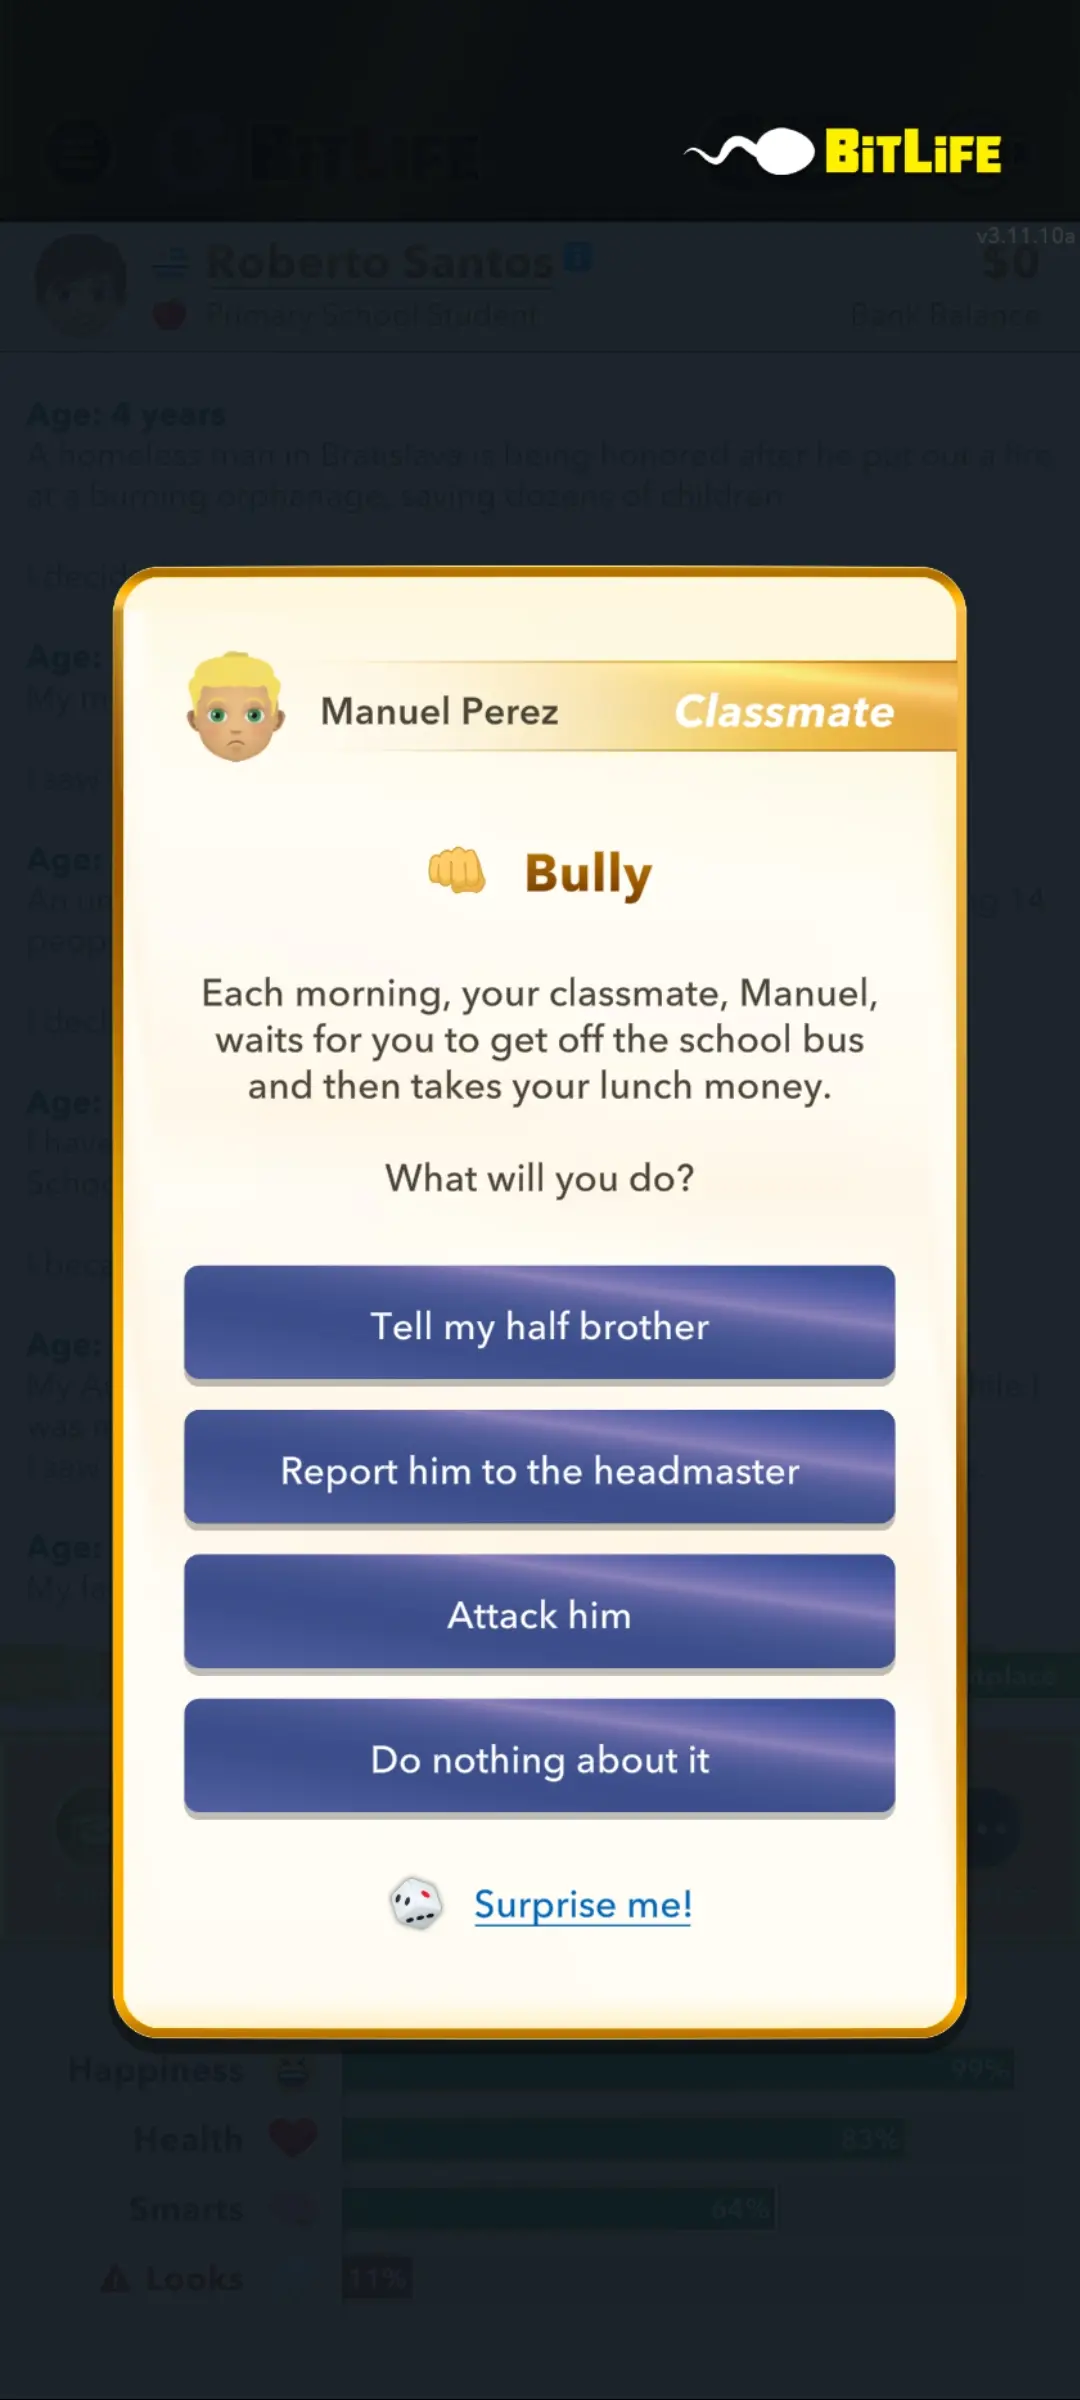 Bit Life questions from Bully